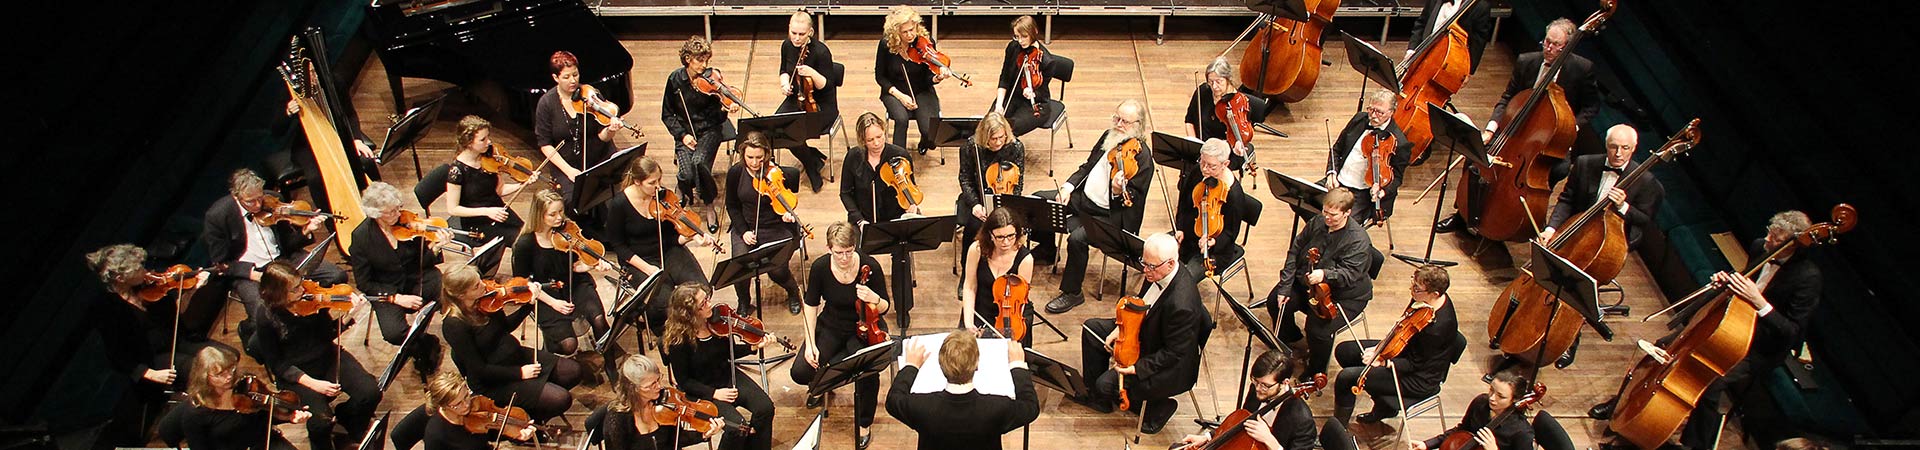 On Tour in Drenthe - VKSO - tickets